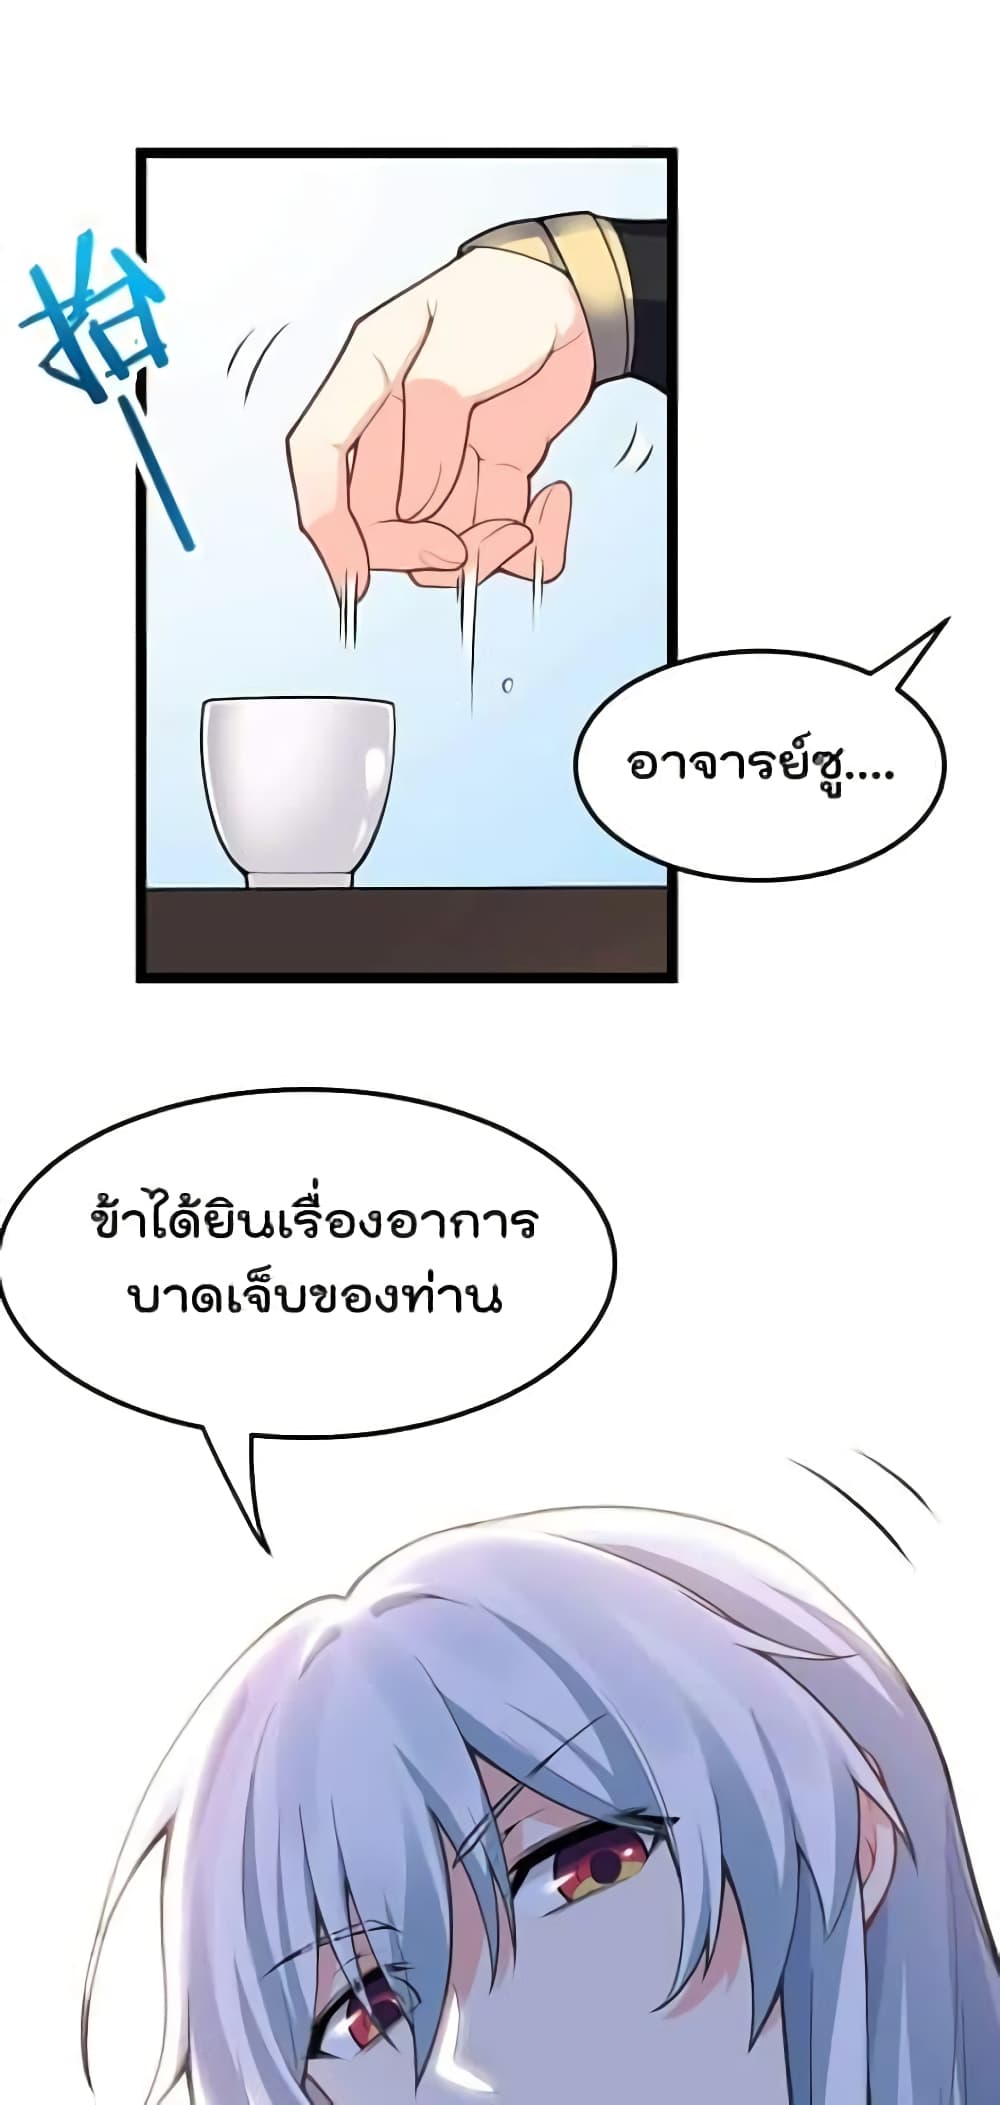 Godsian Masian from Another World ตอนที่ 98 (20)